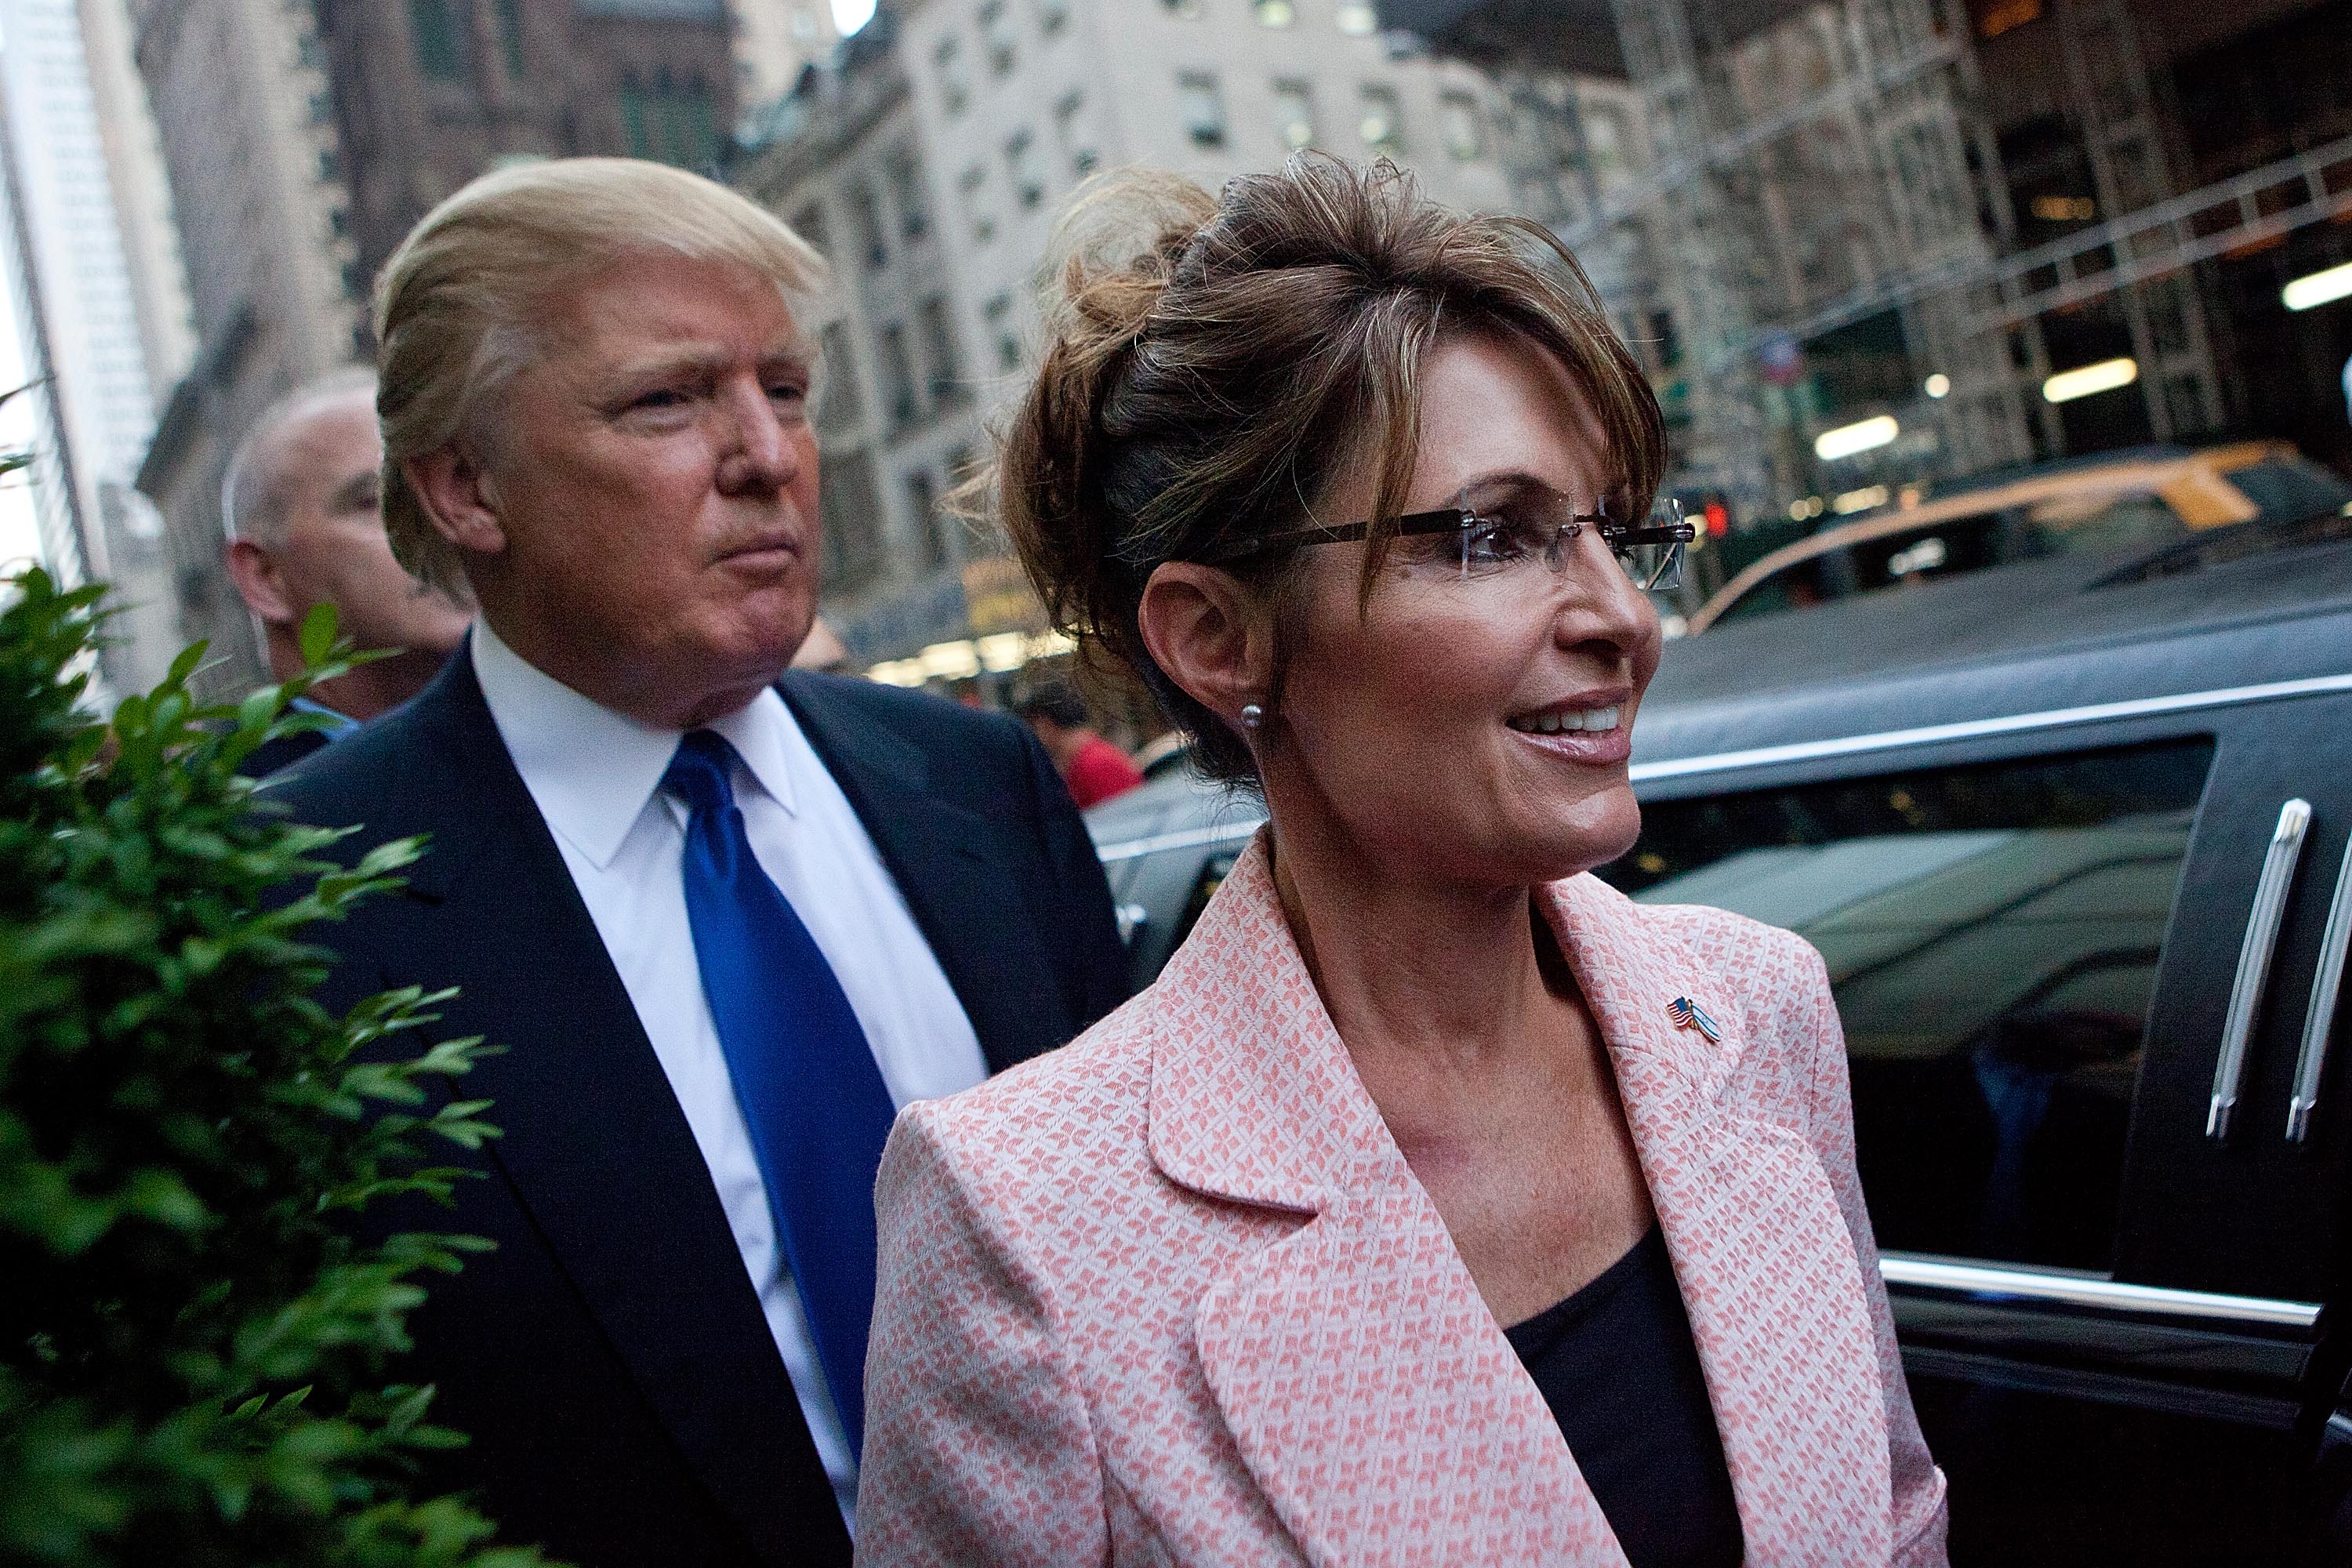 Former U.S. Vice presidential candidate and Alaska Governor Sarah Palin and Donald Trump walk towards a limo after leaving Trump Tower at 56th Street and 5th Avenue on May 31, 2011 in New York City. (Andrew Burton—Getty Images)